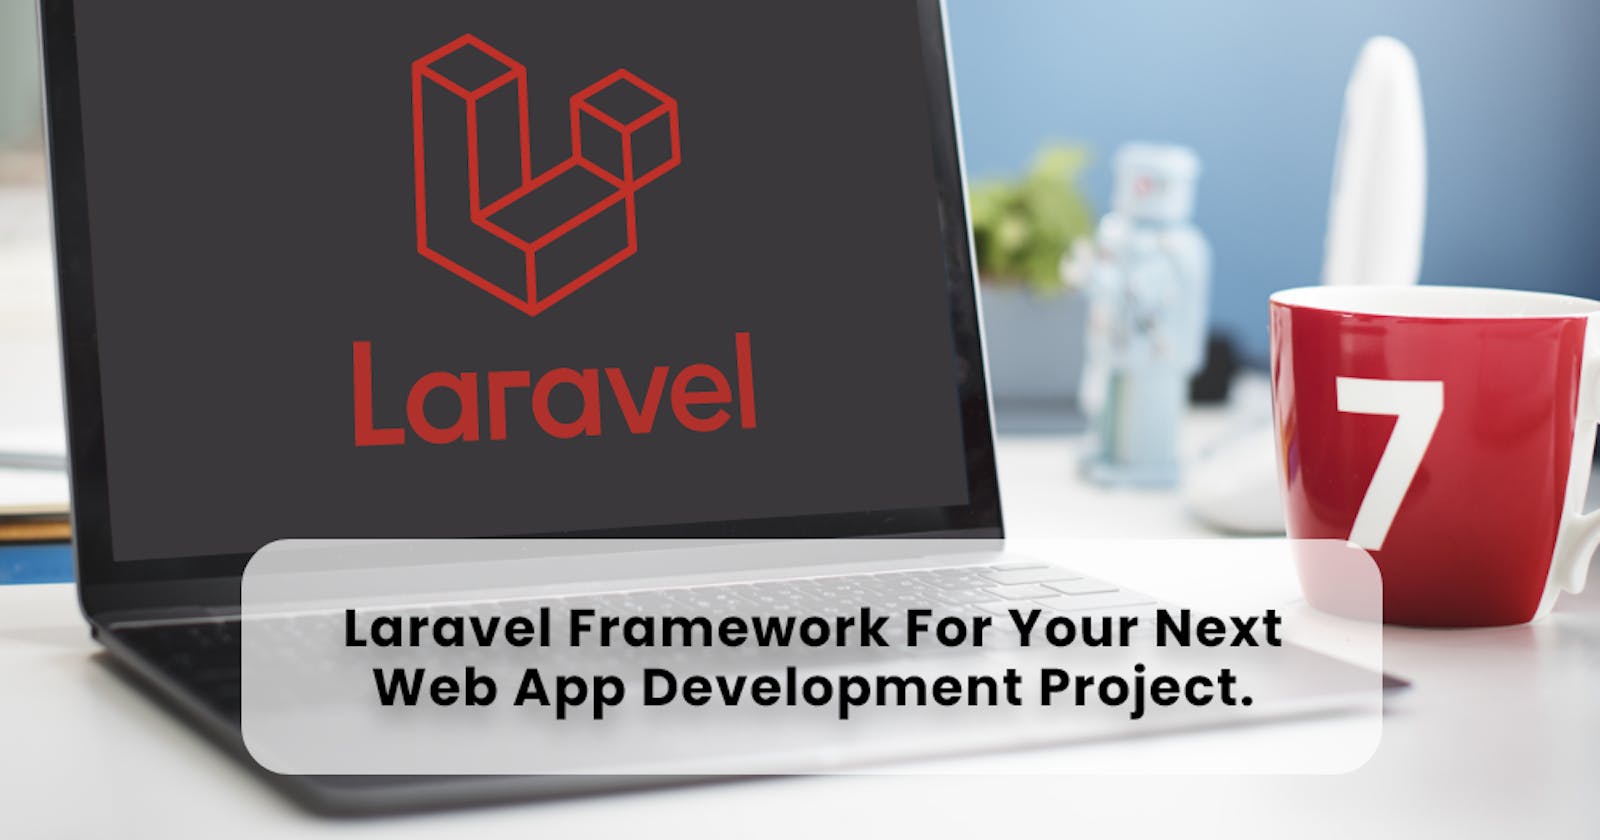 Why You Should Choose the Laravel Framework for your Next Web App Development Project